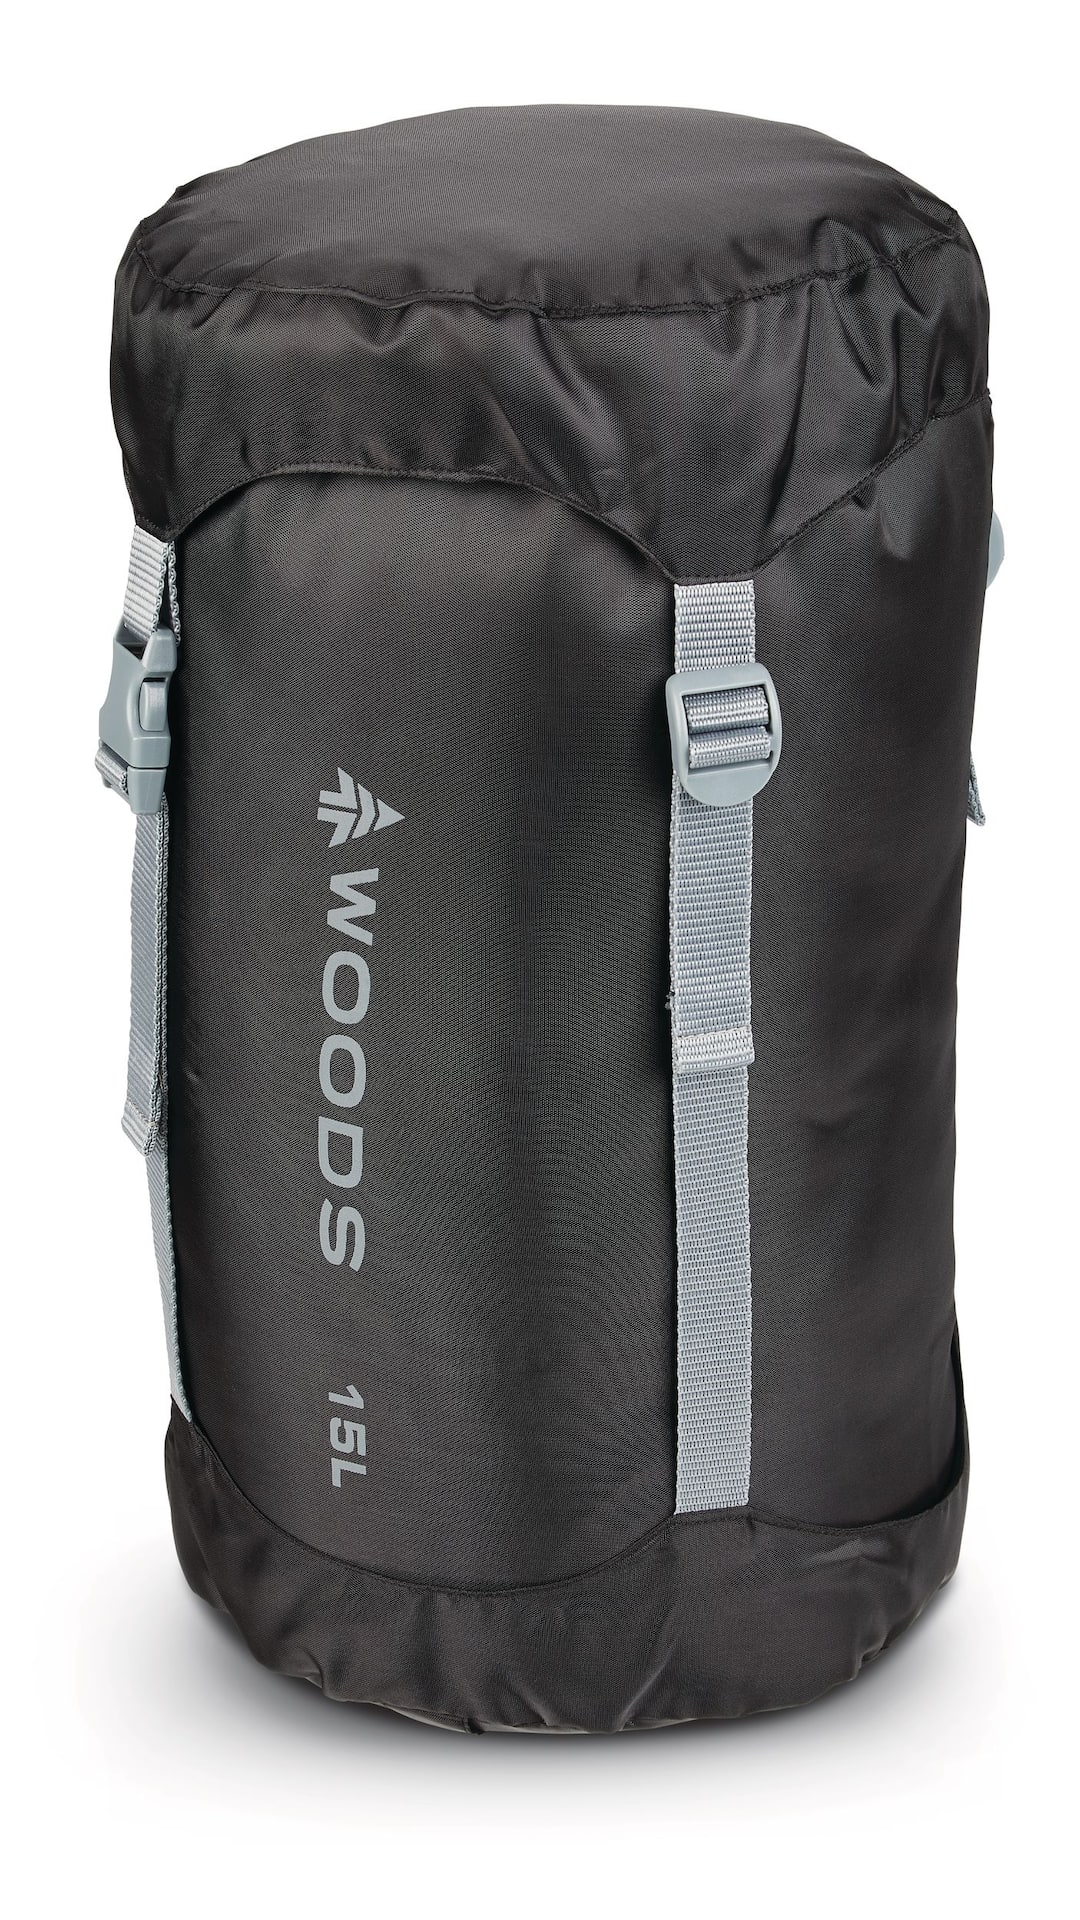 Woods Lightweight Compression Stuff Sack For Camping, Backpacking, Hiking &  Travel, Medium